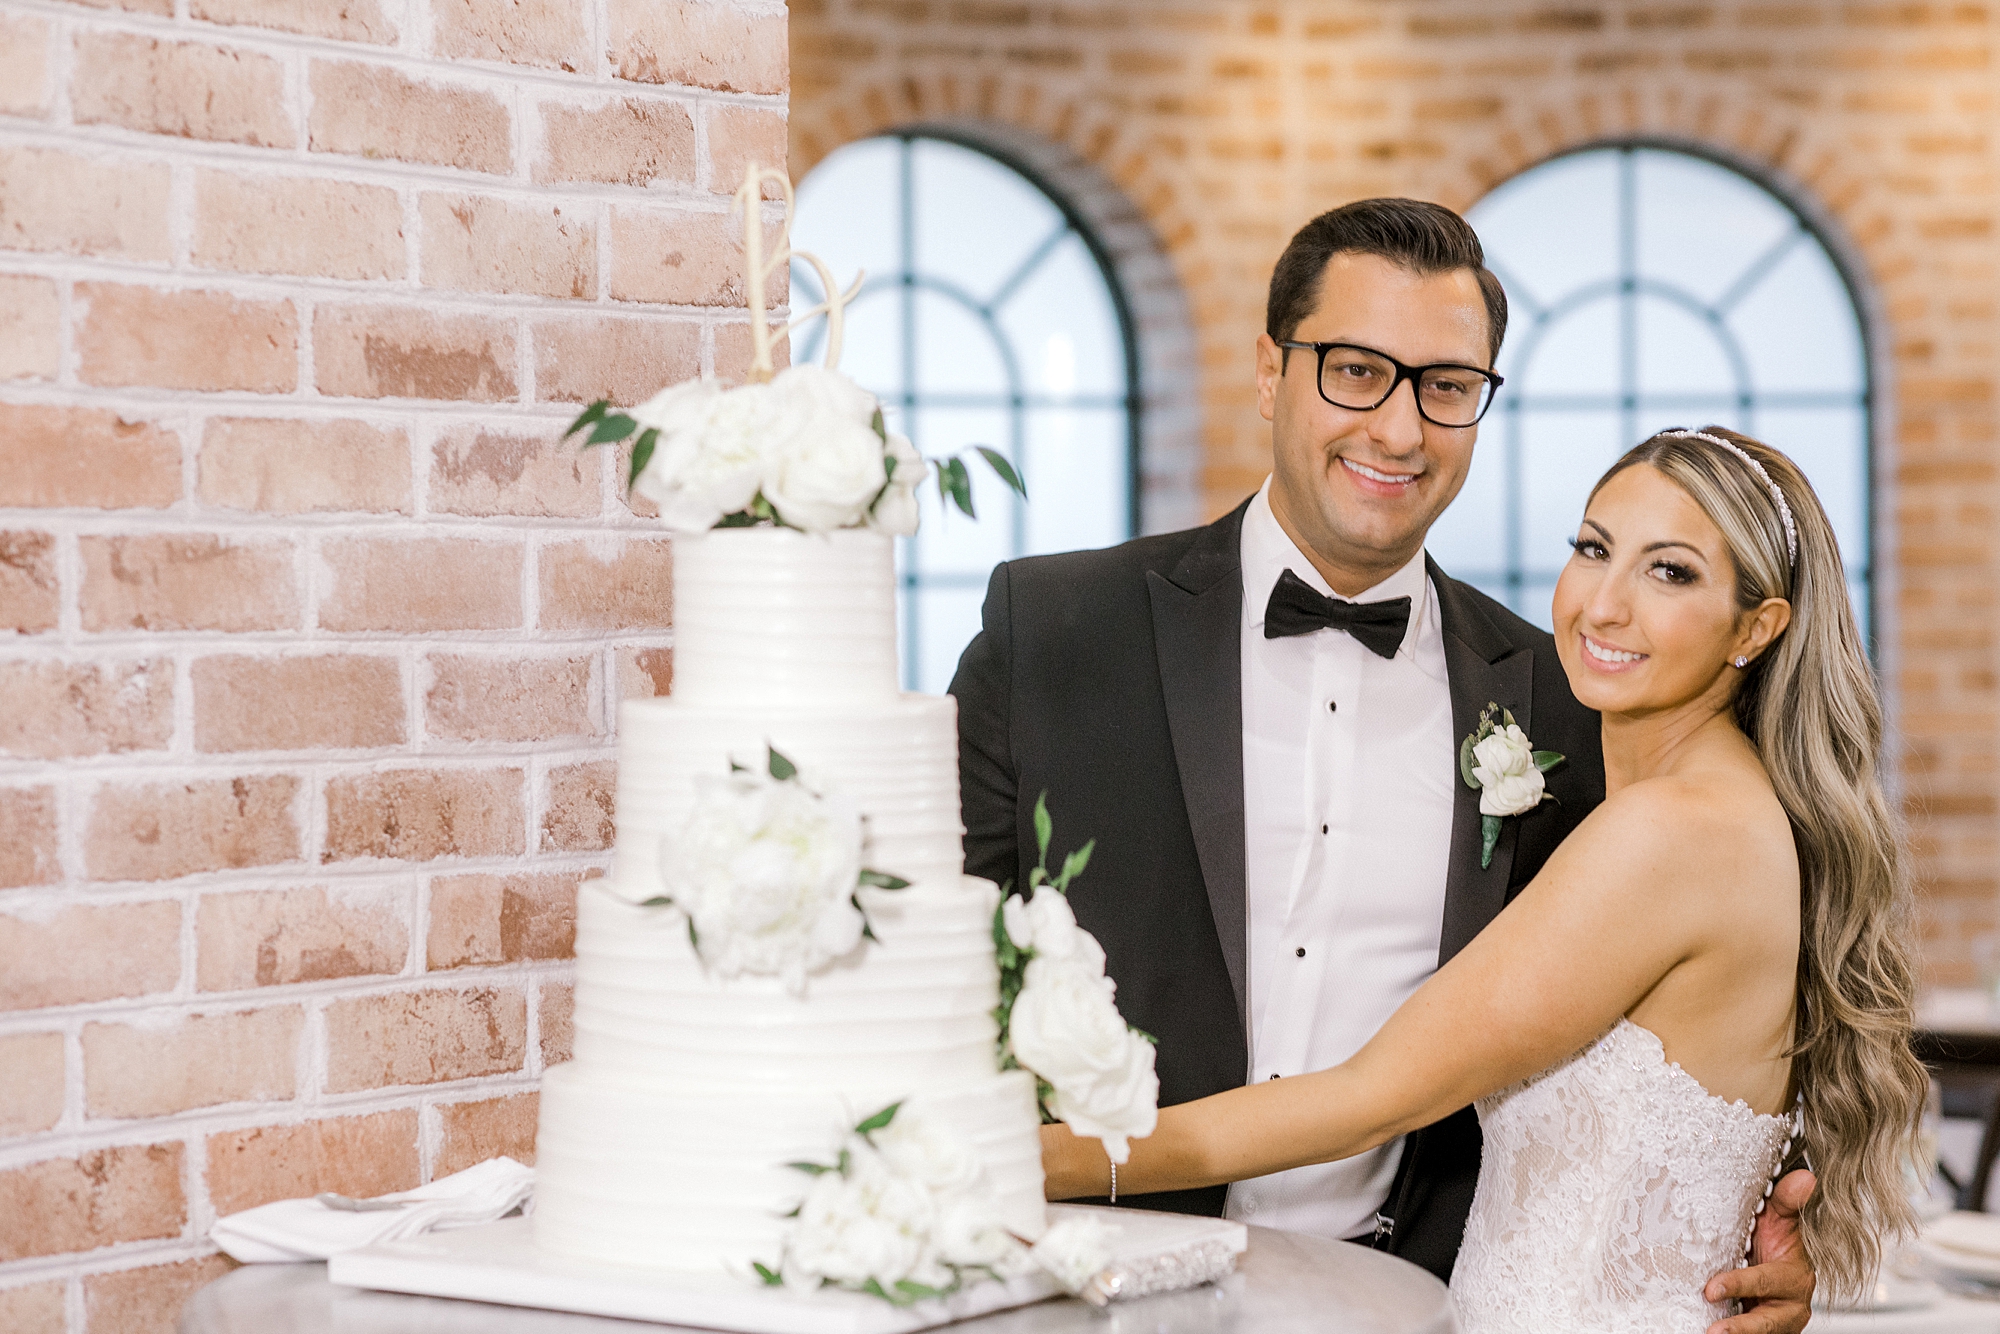 bride and groom pose by tiered wedding cake by brick wall